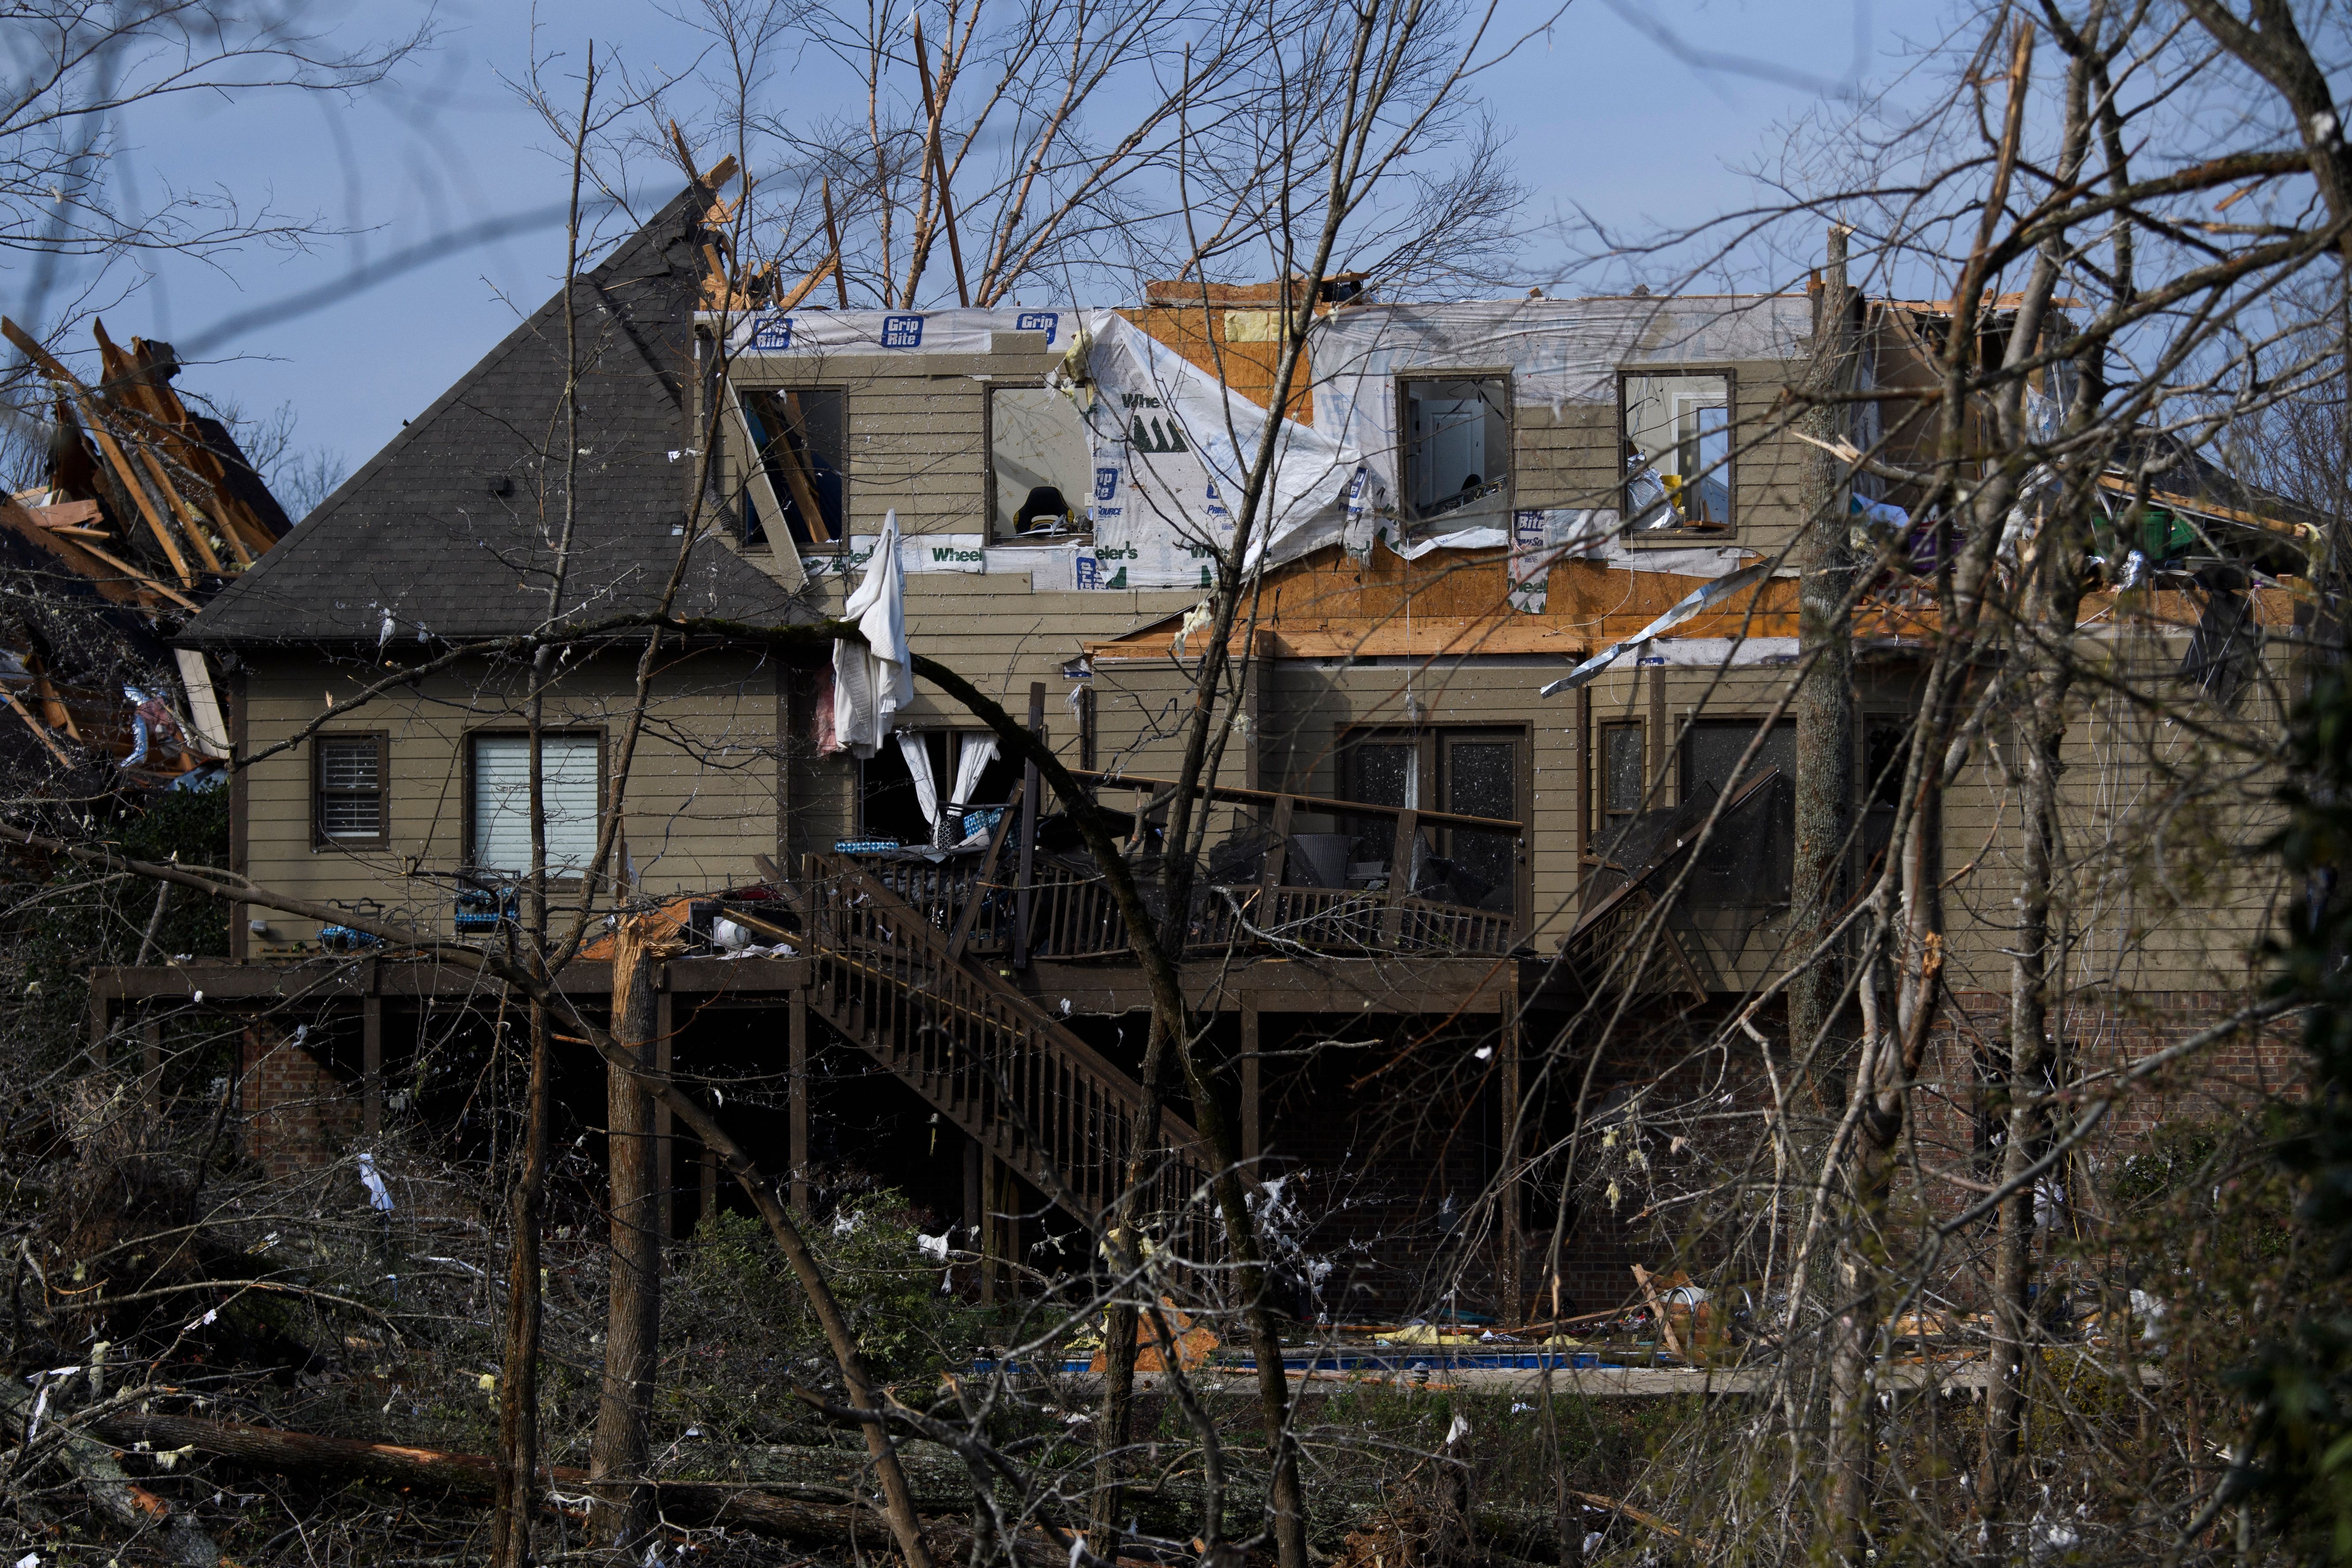 Photo of a home significantly damaged by a tornado